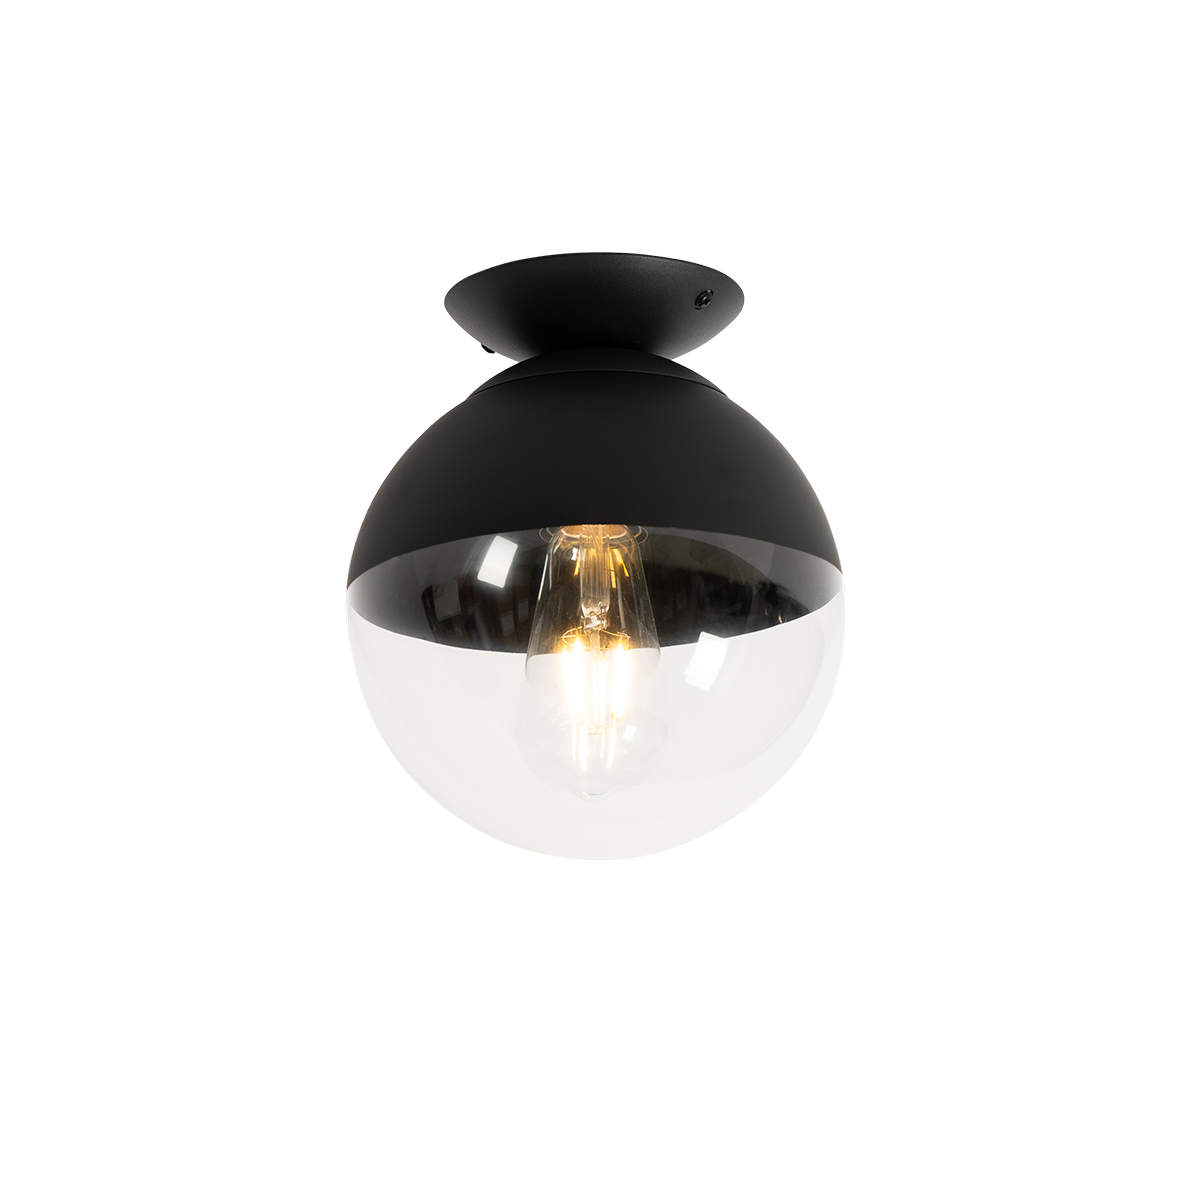 Retro ceiling lamp black with clear glass - Eclipse